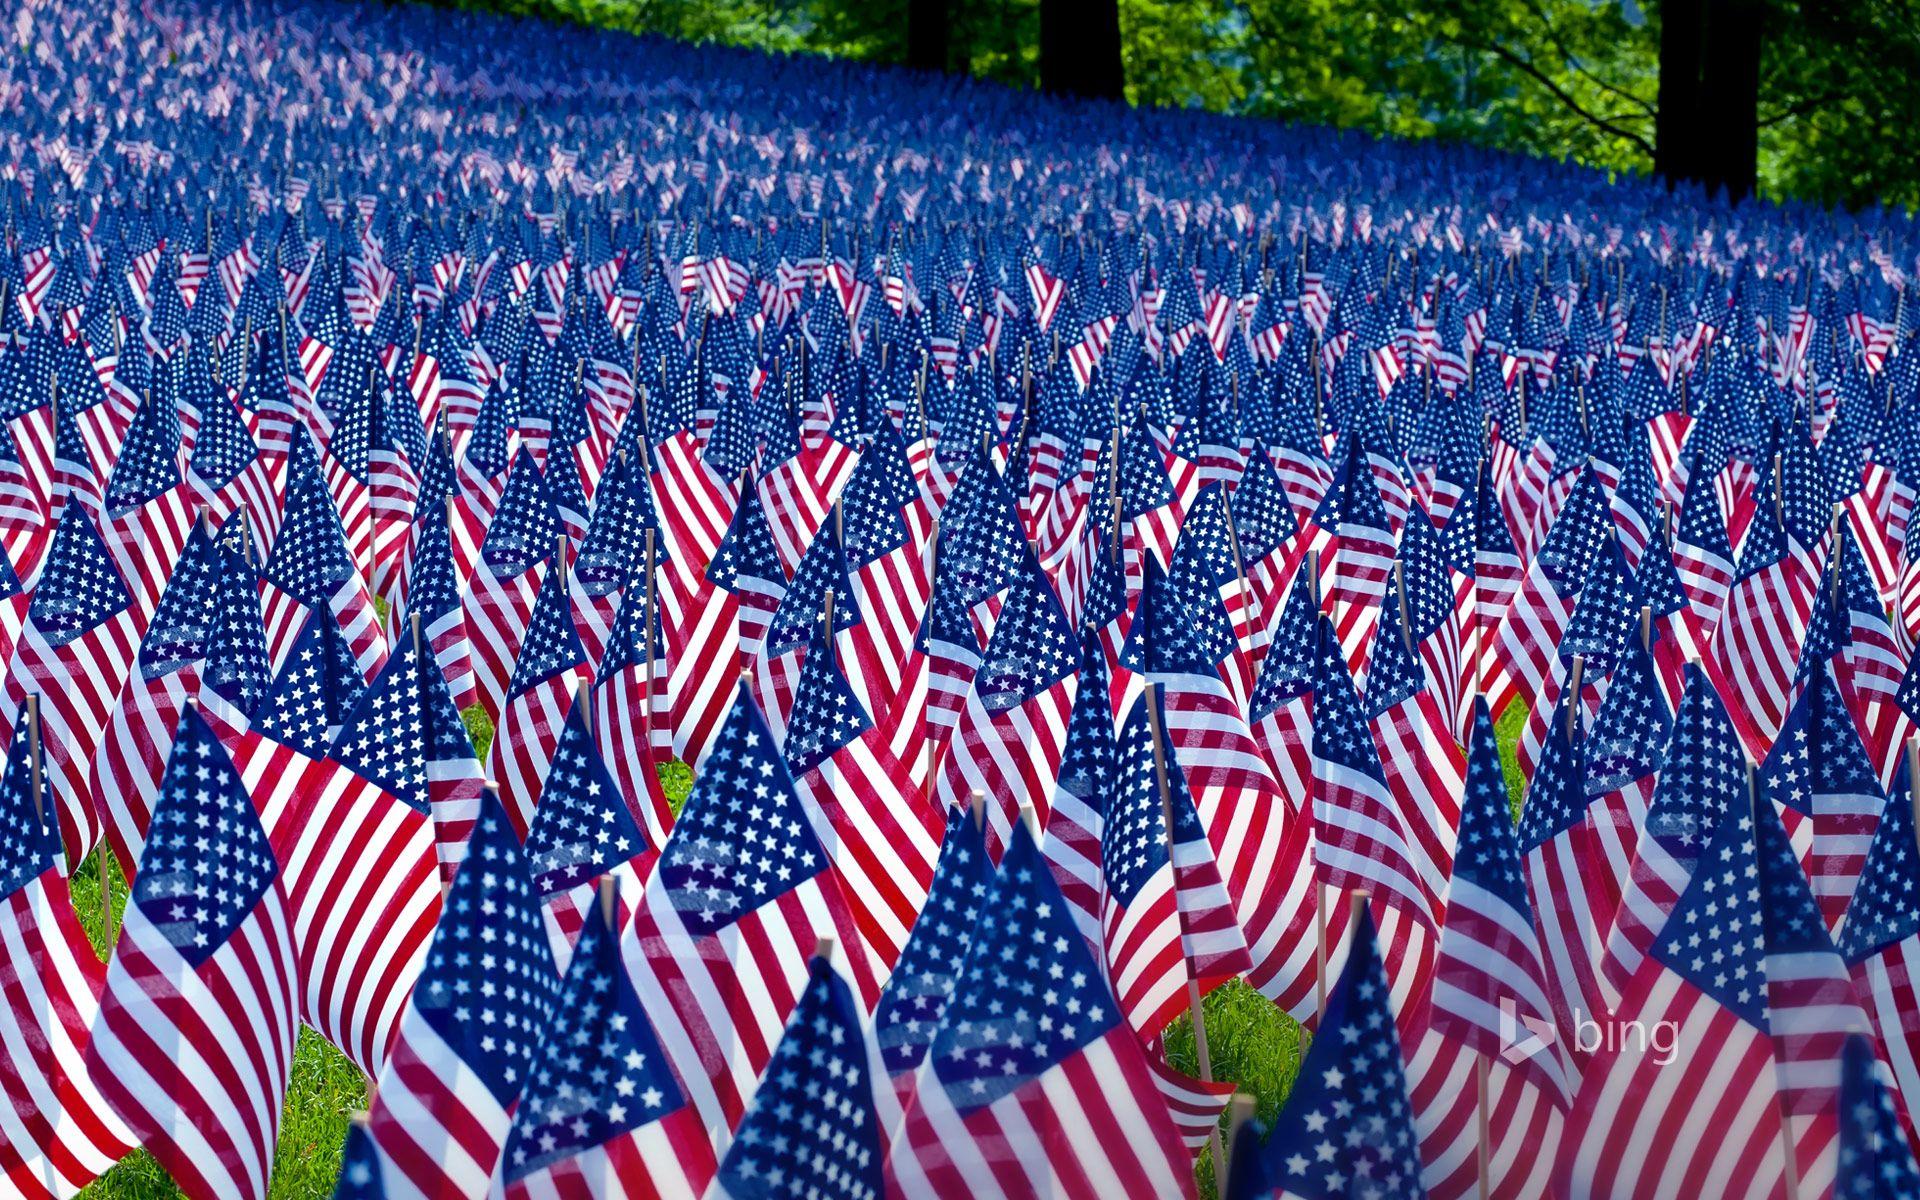 Field of flags displayed for Memorial Day, Boston, Massachusetts